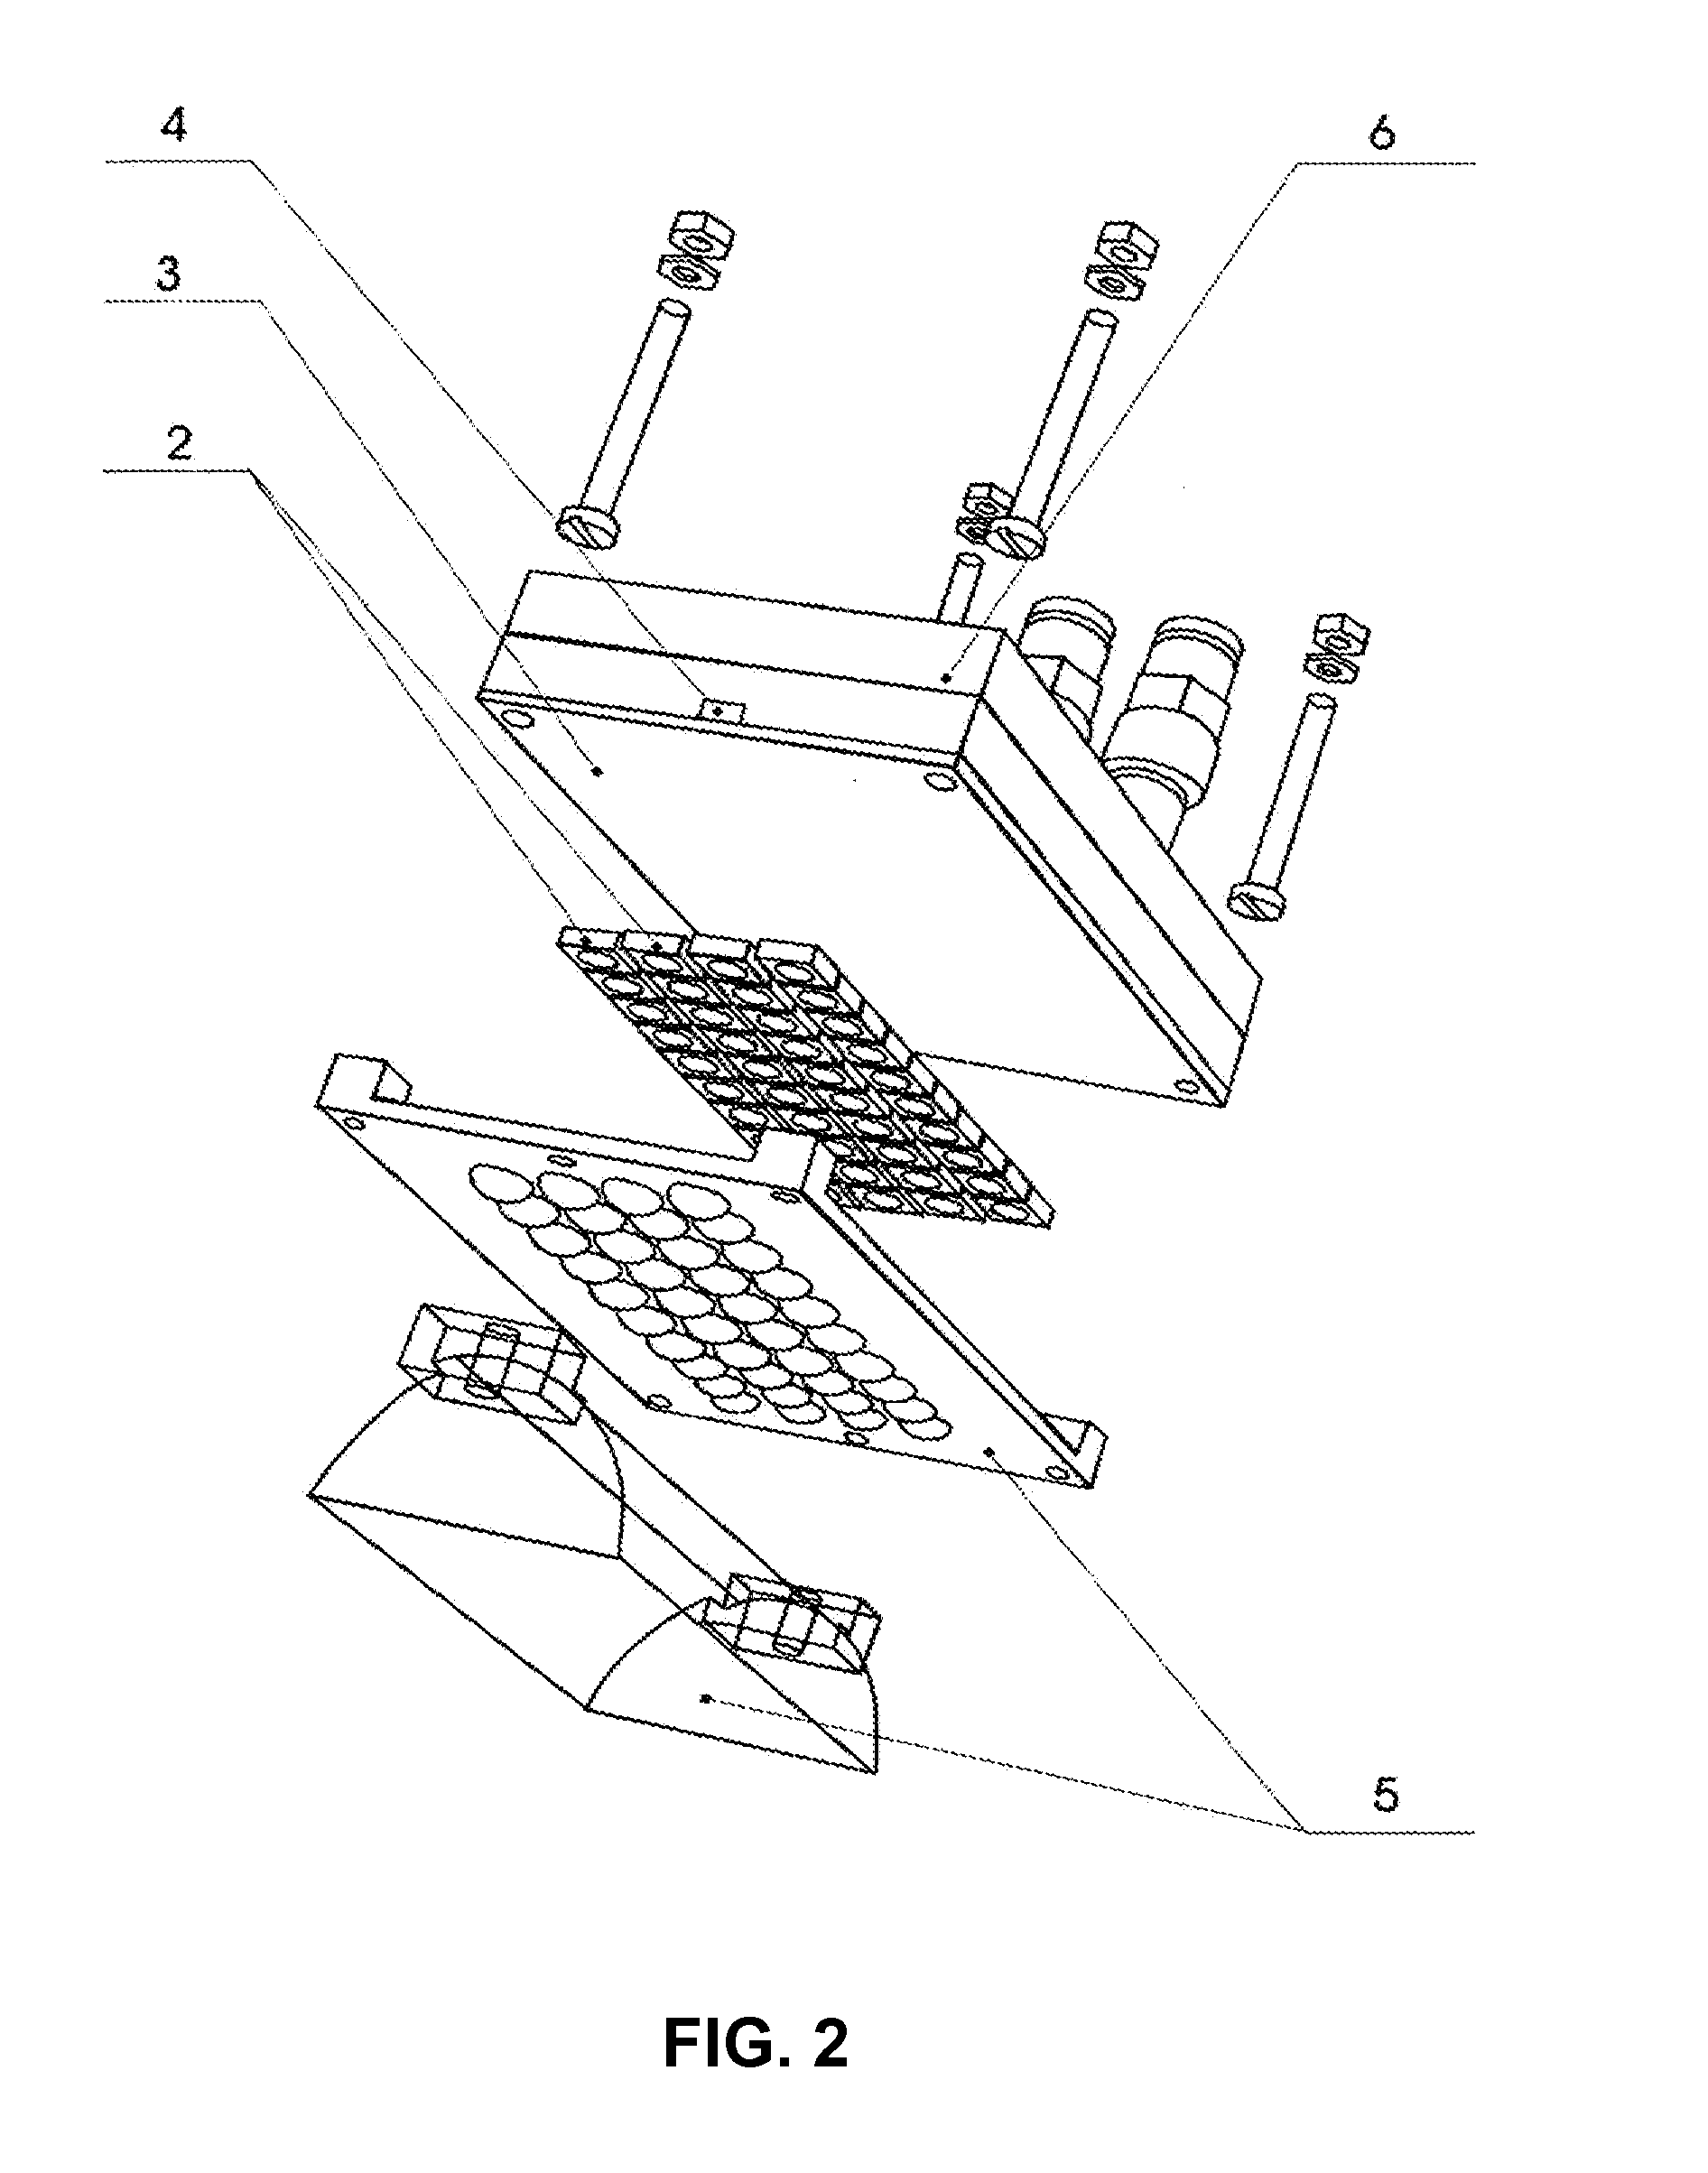 Method for curing substances by UV radiation, device for carrying out said method and ink cured by UV radiation